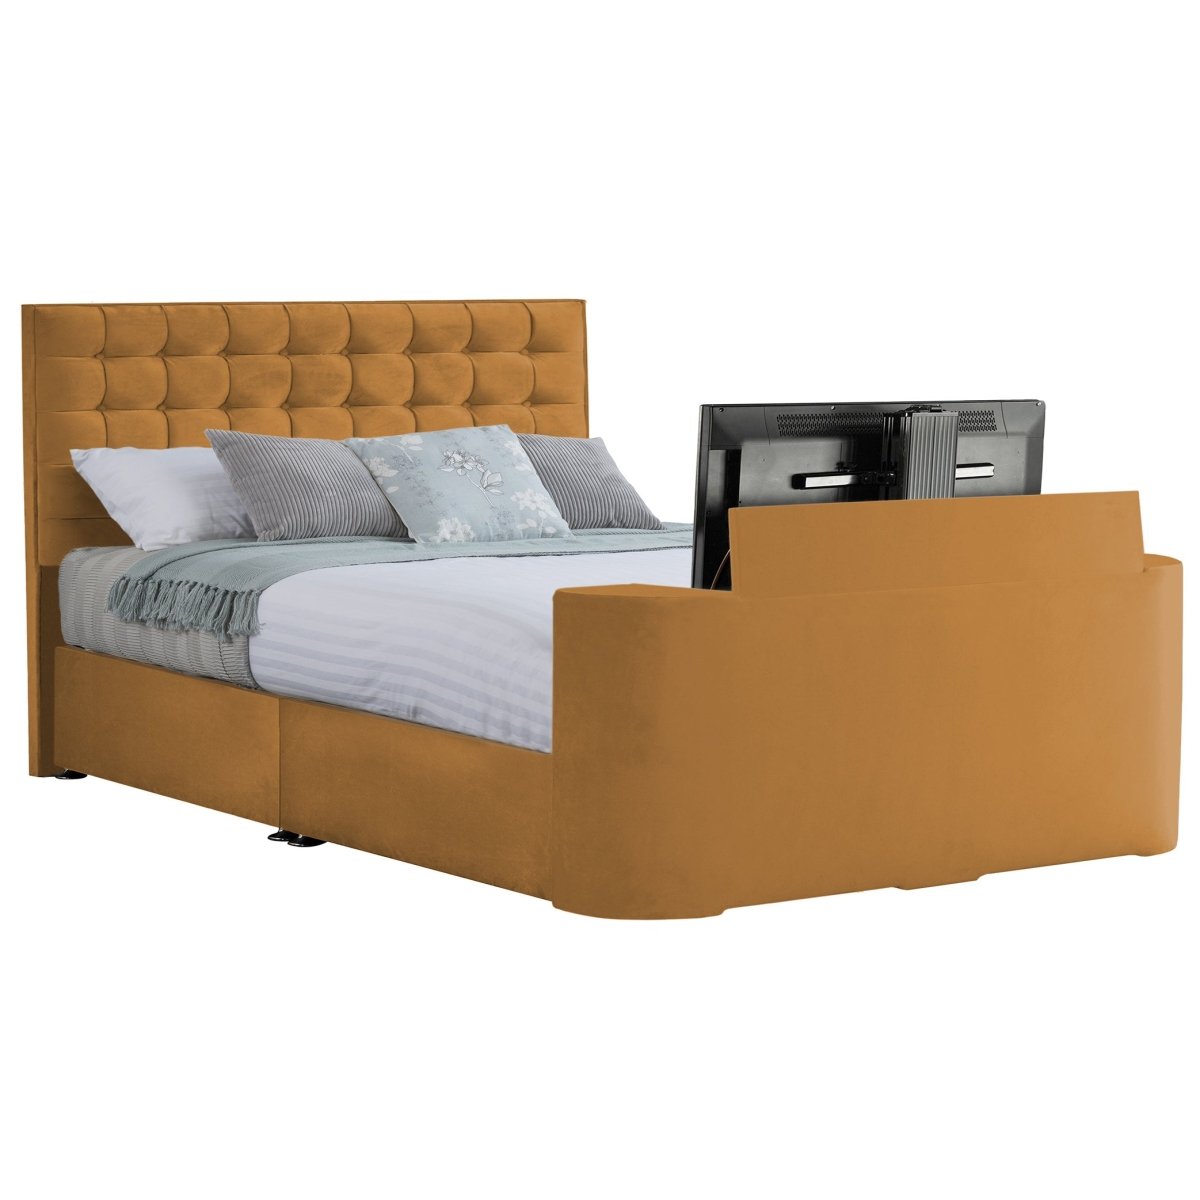 Image Classic TV Bed with Storage Options - Sweet Dreams - TV Beds Northwest - INIMA-CLA-135PT4DCHATS OYSTER - choose your colour tvbed - doubletvbed